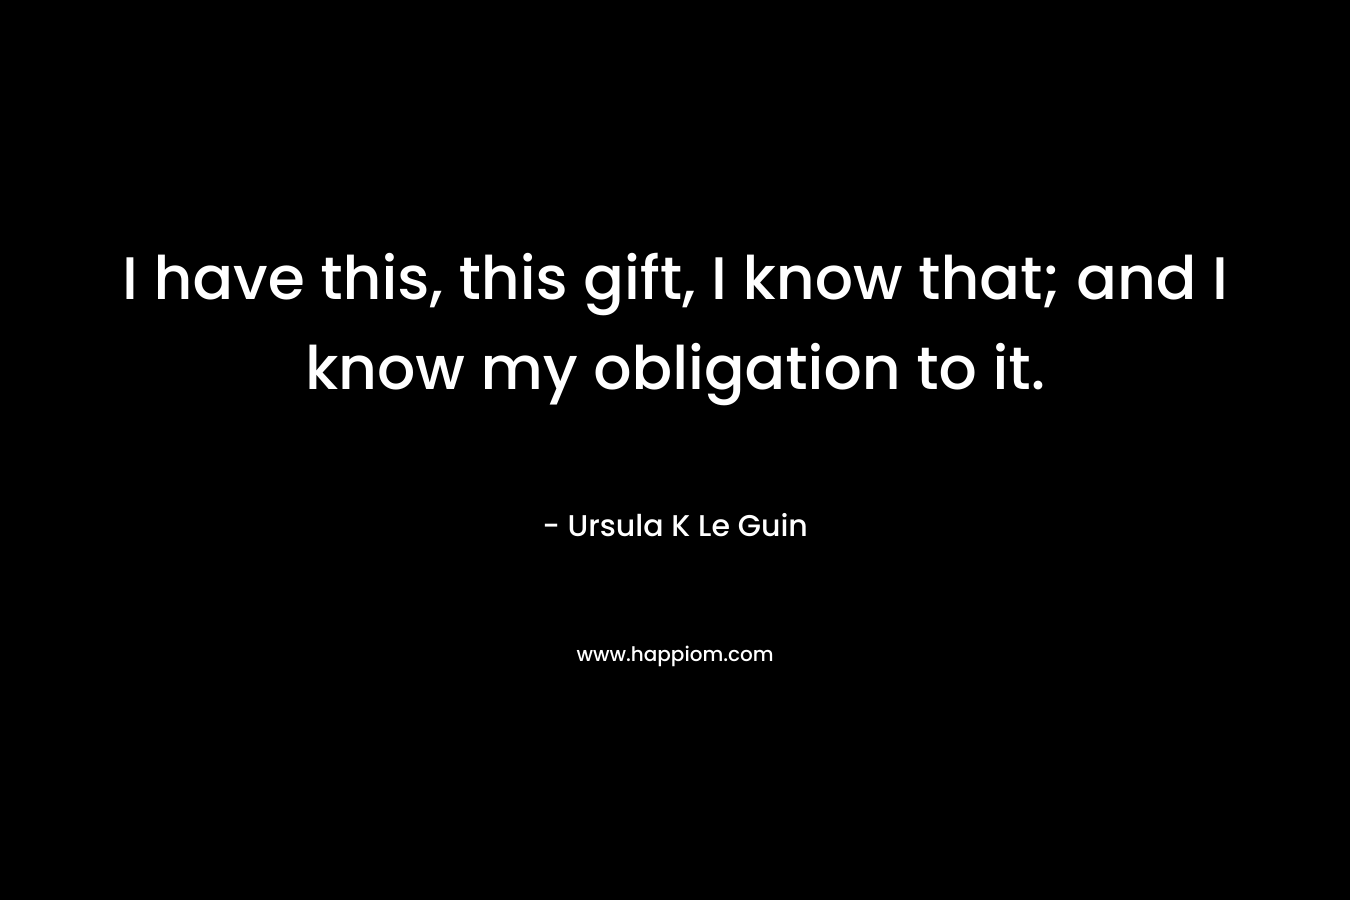 I have this, this gift, I know that; and I know my obligation to it.